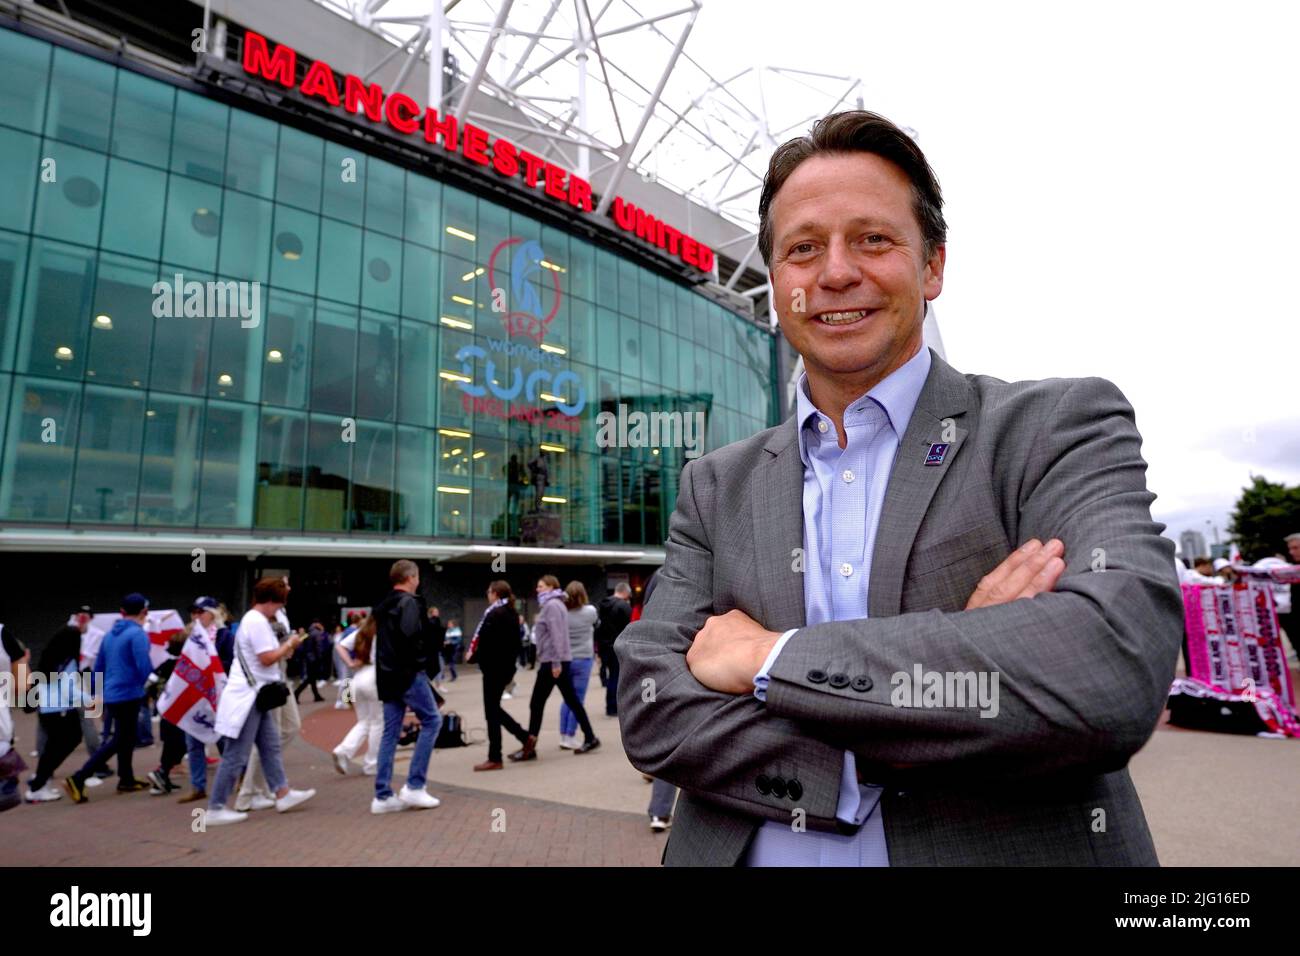 Nigel Huddleston MP, Minister for Tourism, Sport, Commonwealth Games, Heritage, and Civil Society, ahead of the UEFA Women's Euro 2022 Group A match at Old Trafford, Manchester. Picture date: Wednesday July 6, 2022. Stock Photo